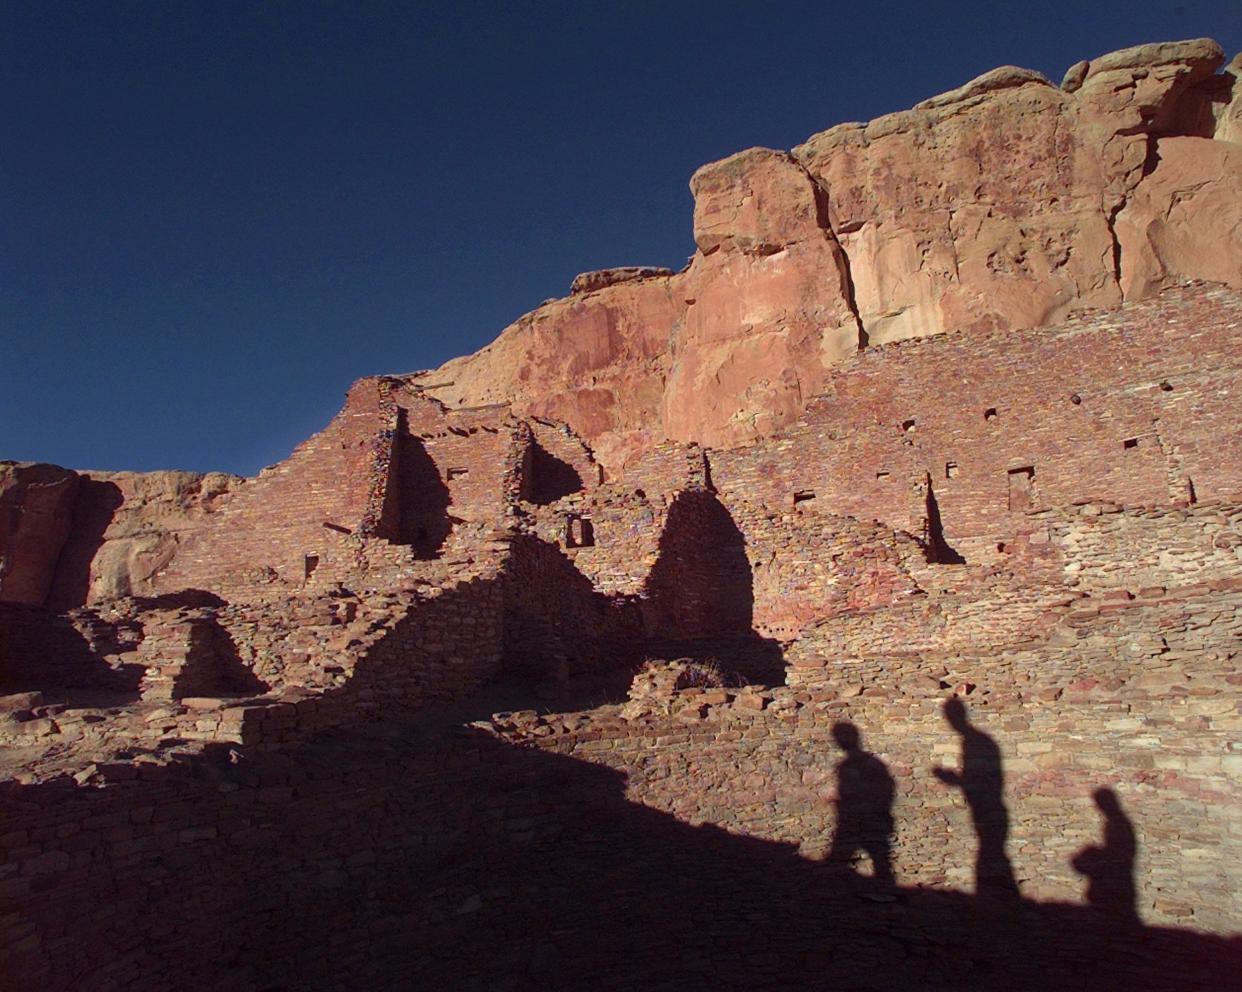 Tourists cast their shadows on the ancient Anasazi ruins of Chaco Canyon in N.M. in 1996. The UNESCO World Heritage Site has become a flash point as tribal leaders and environmentalists look to curb drilling.